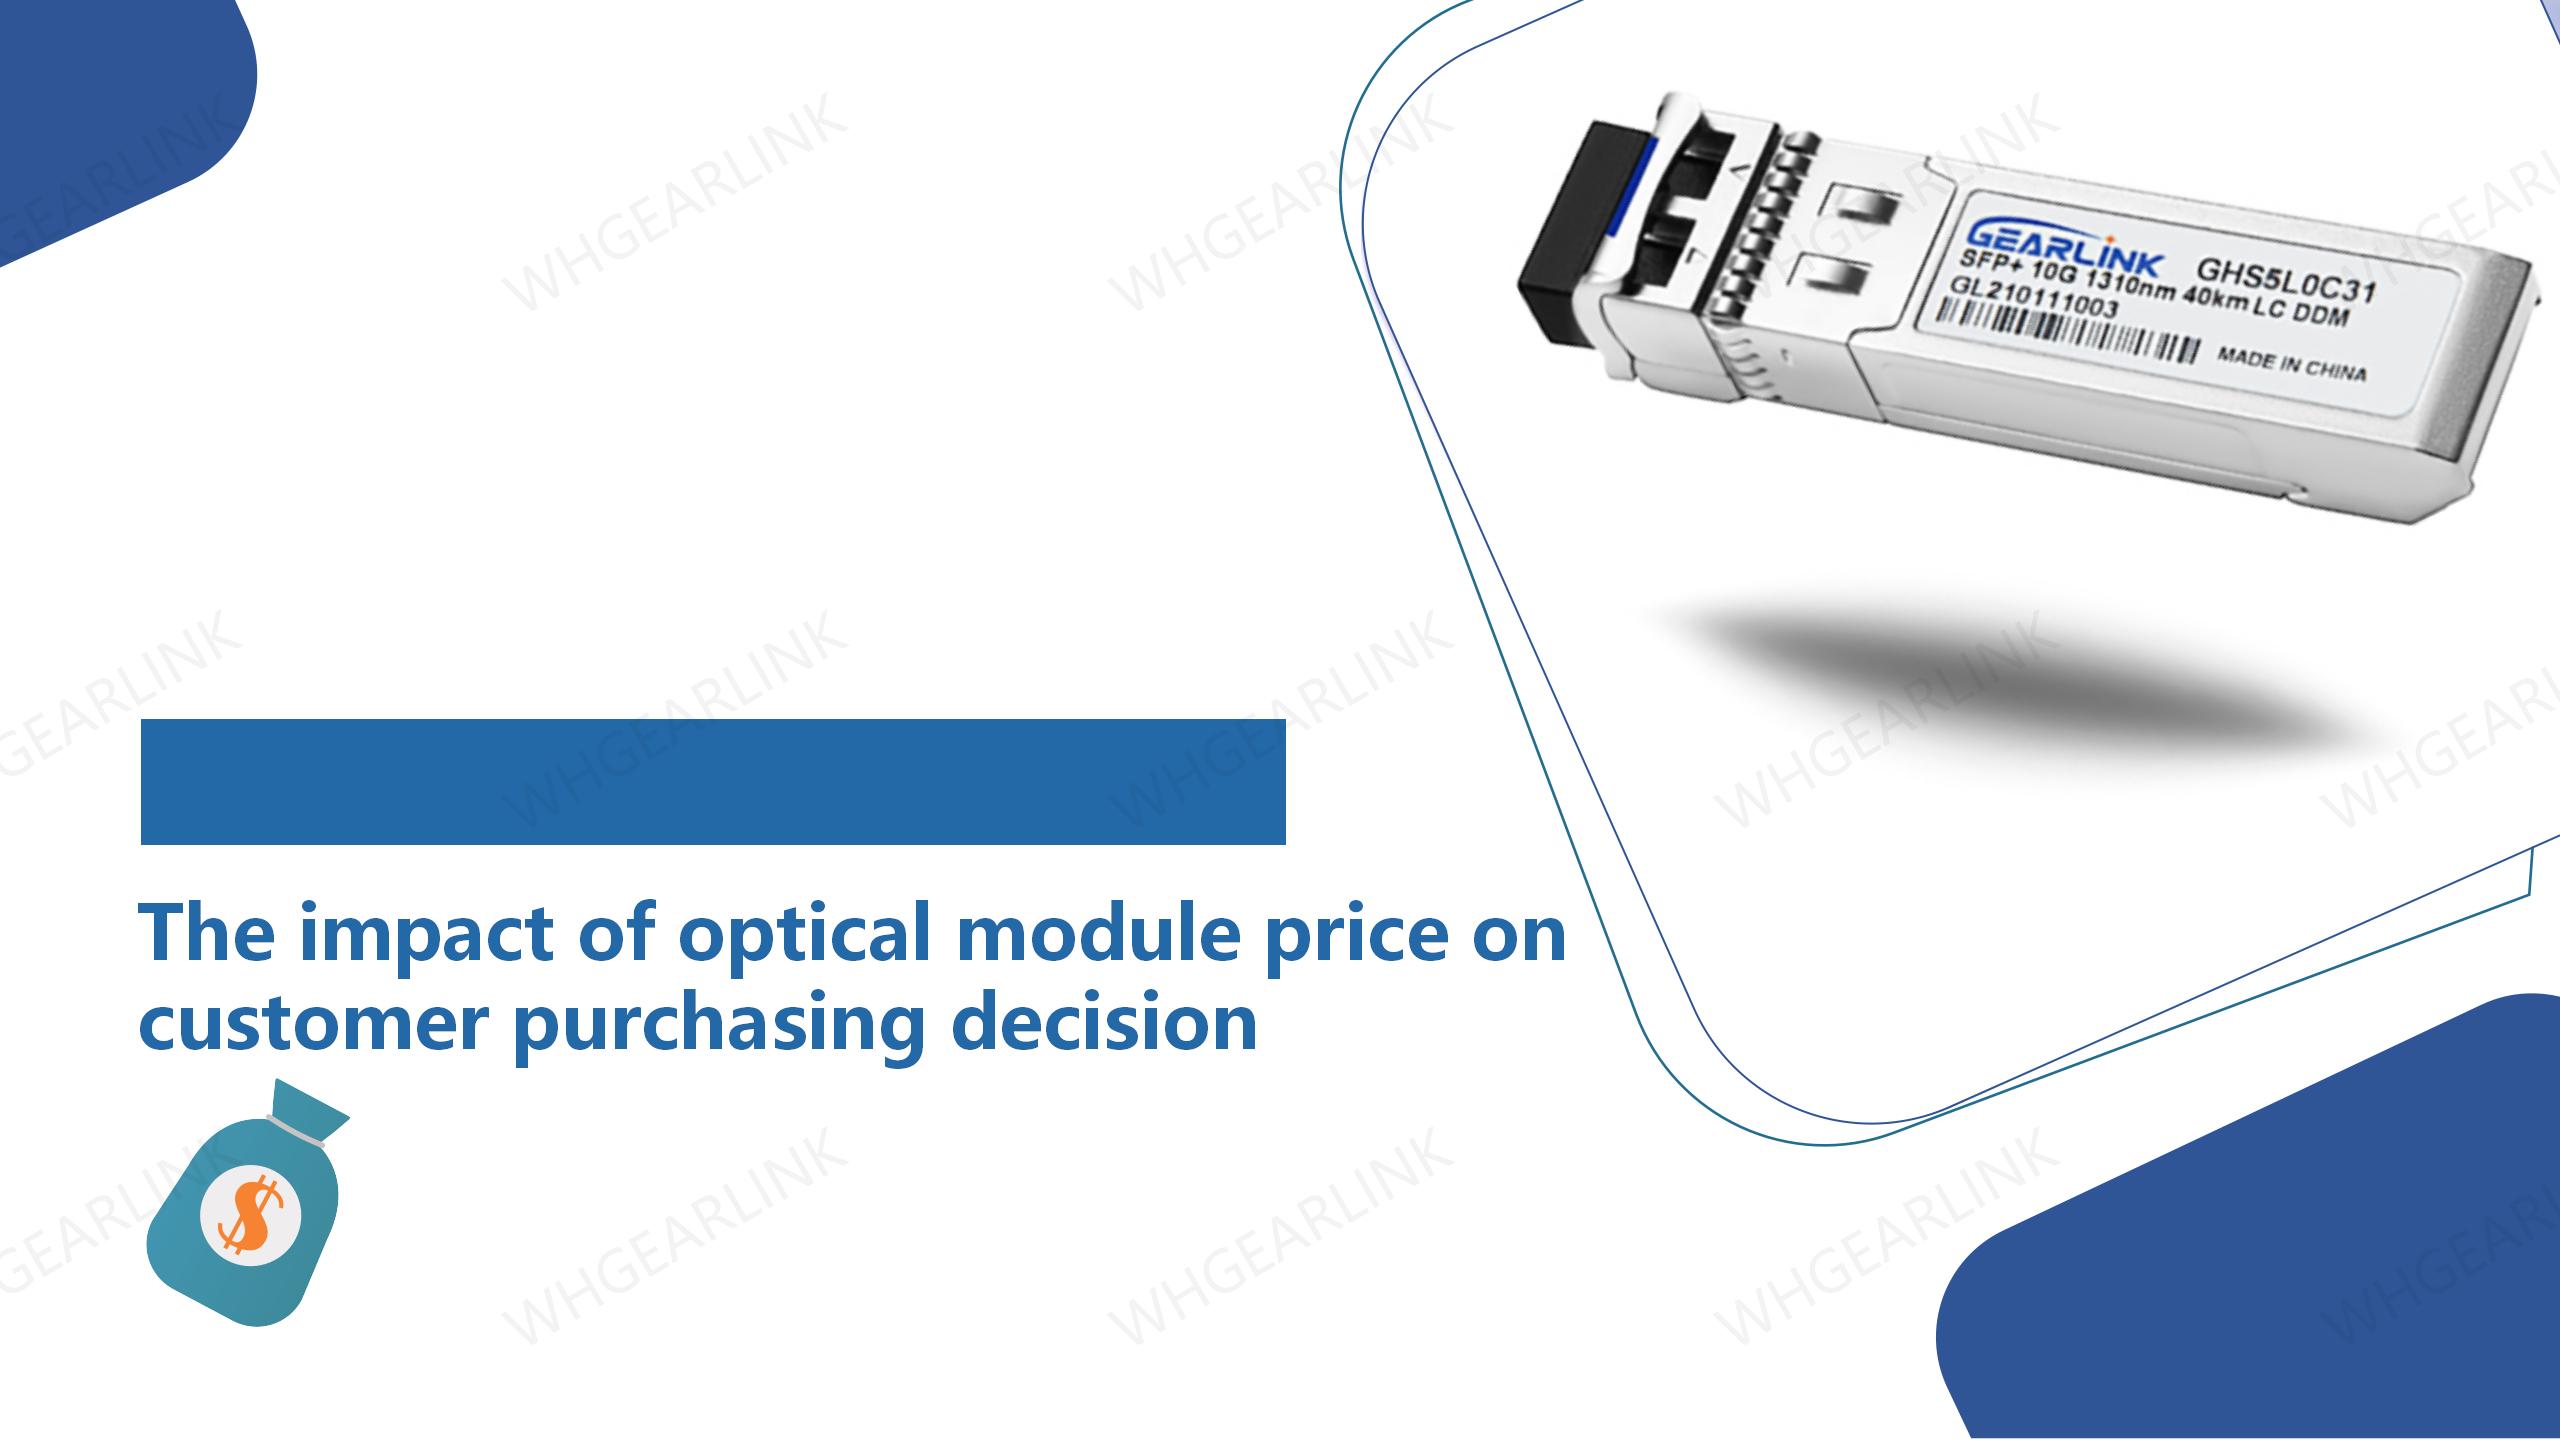 The impact of optical module price on customer purchasing decision